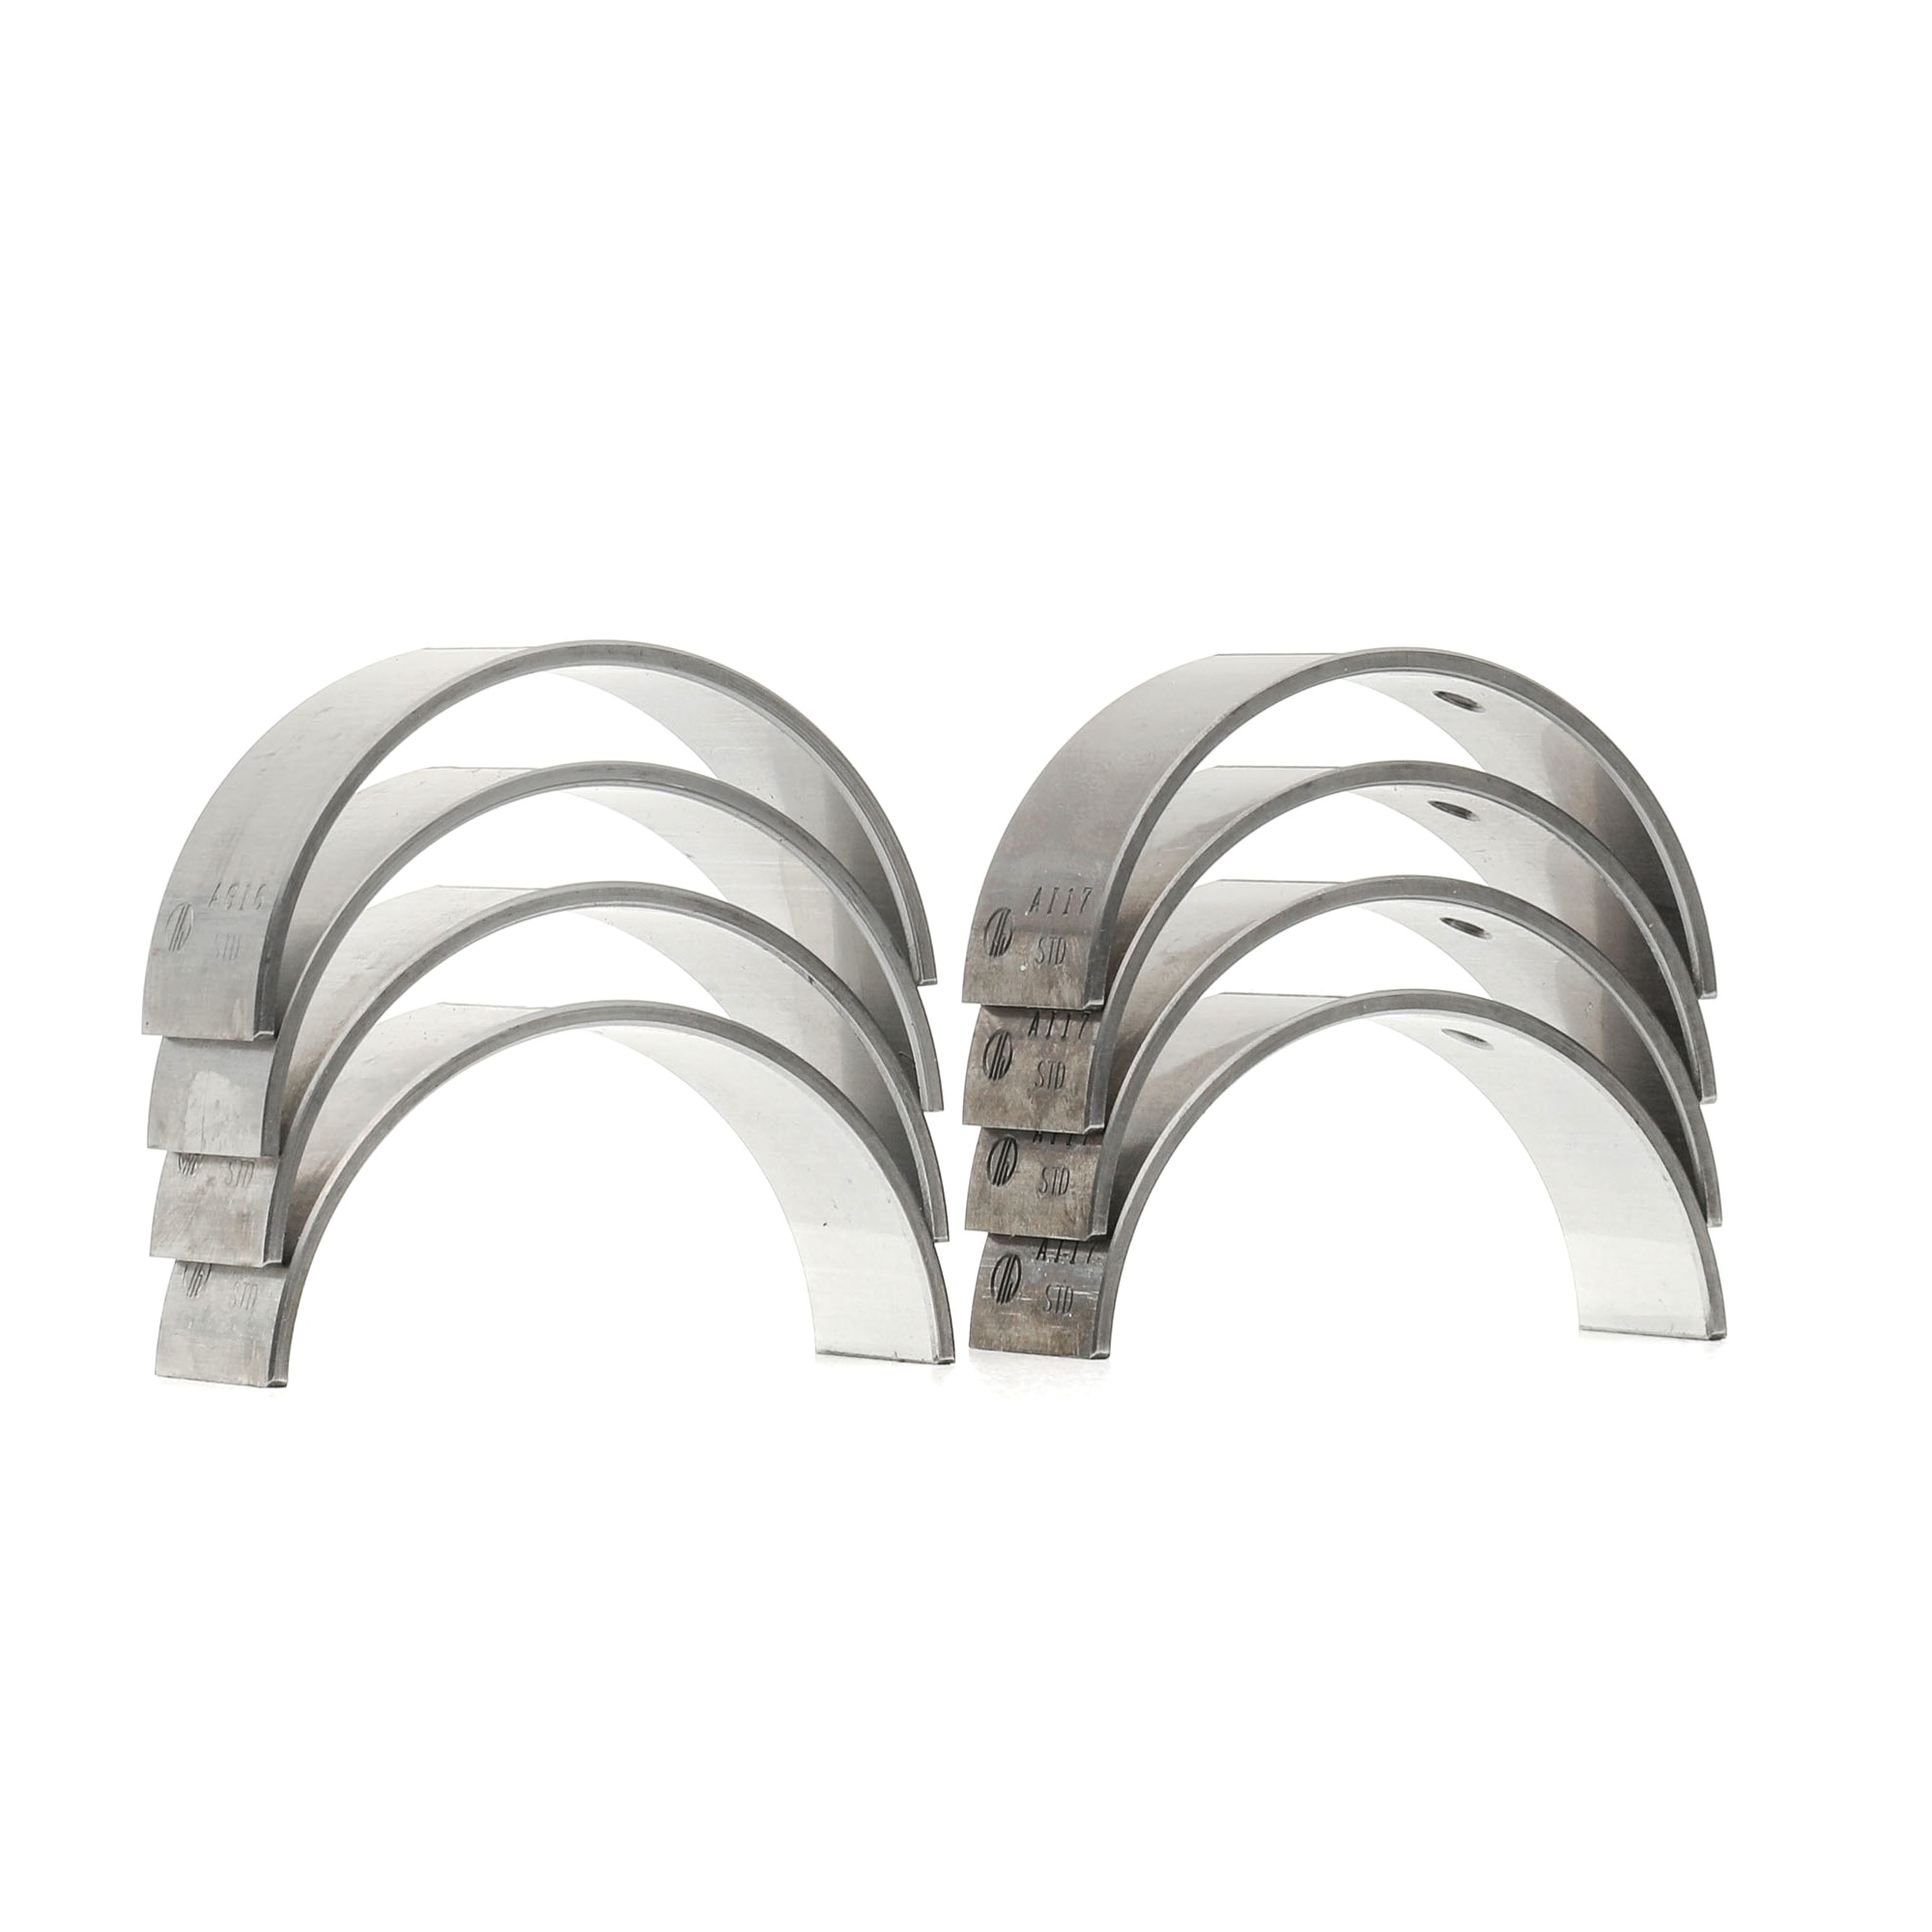 Great value for money - GLYCO Big End Bearings 01-5049/4 STD